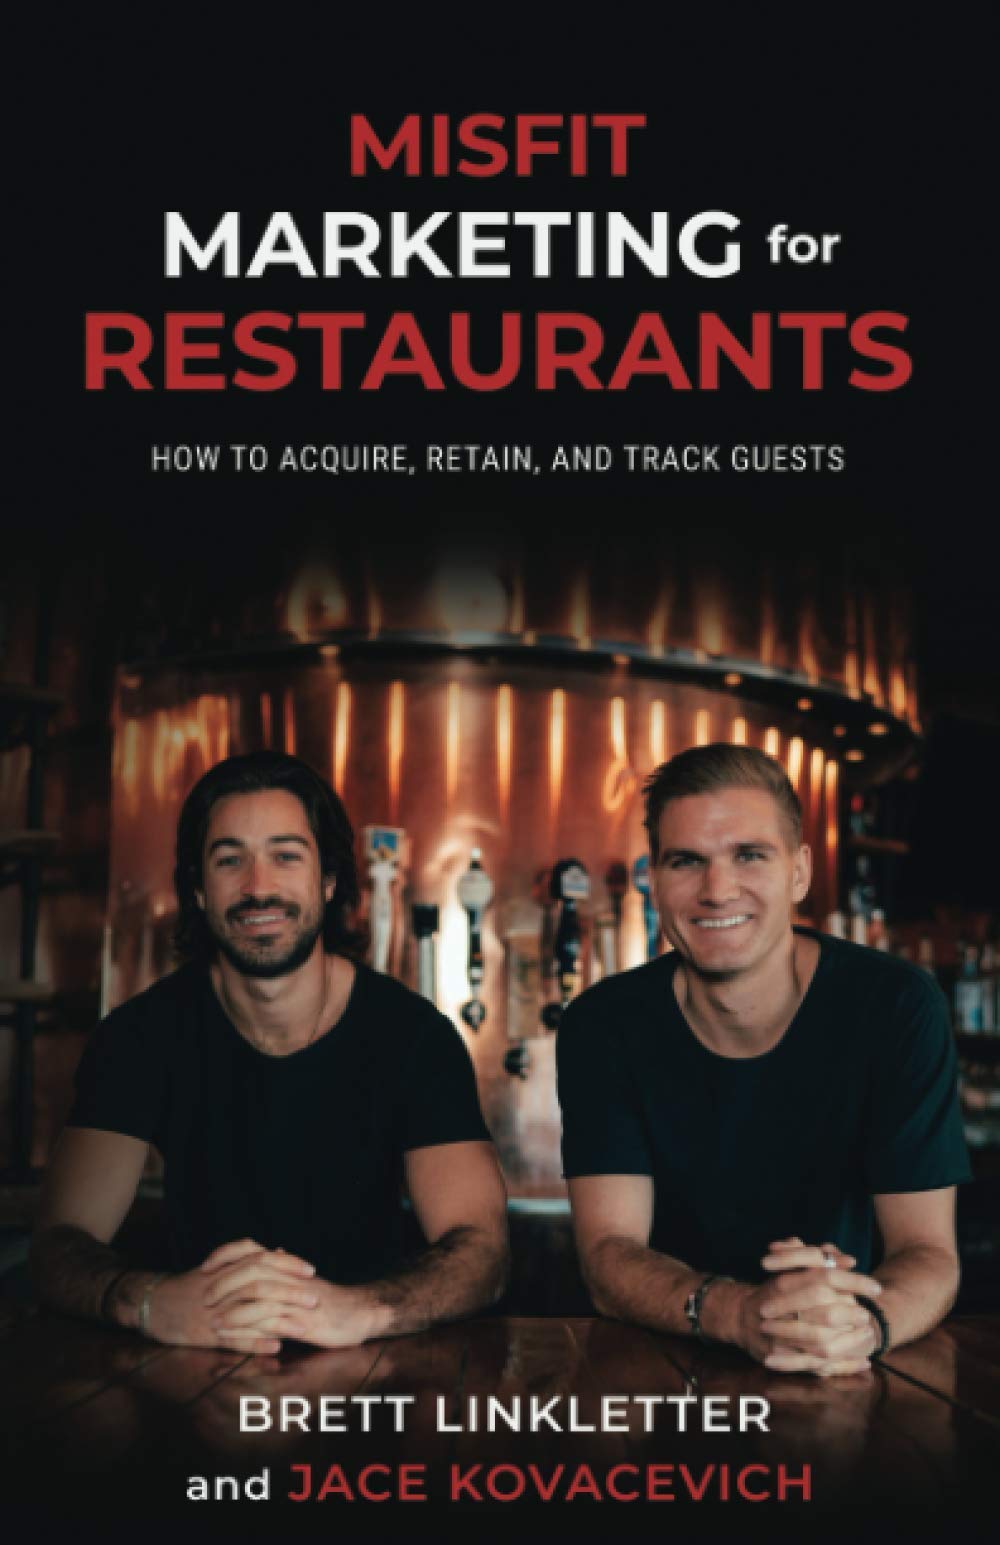 Misfit Marketing for Restaurants: How to Acquire, Retain, and Track Guests